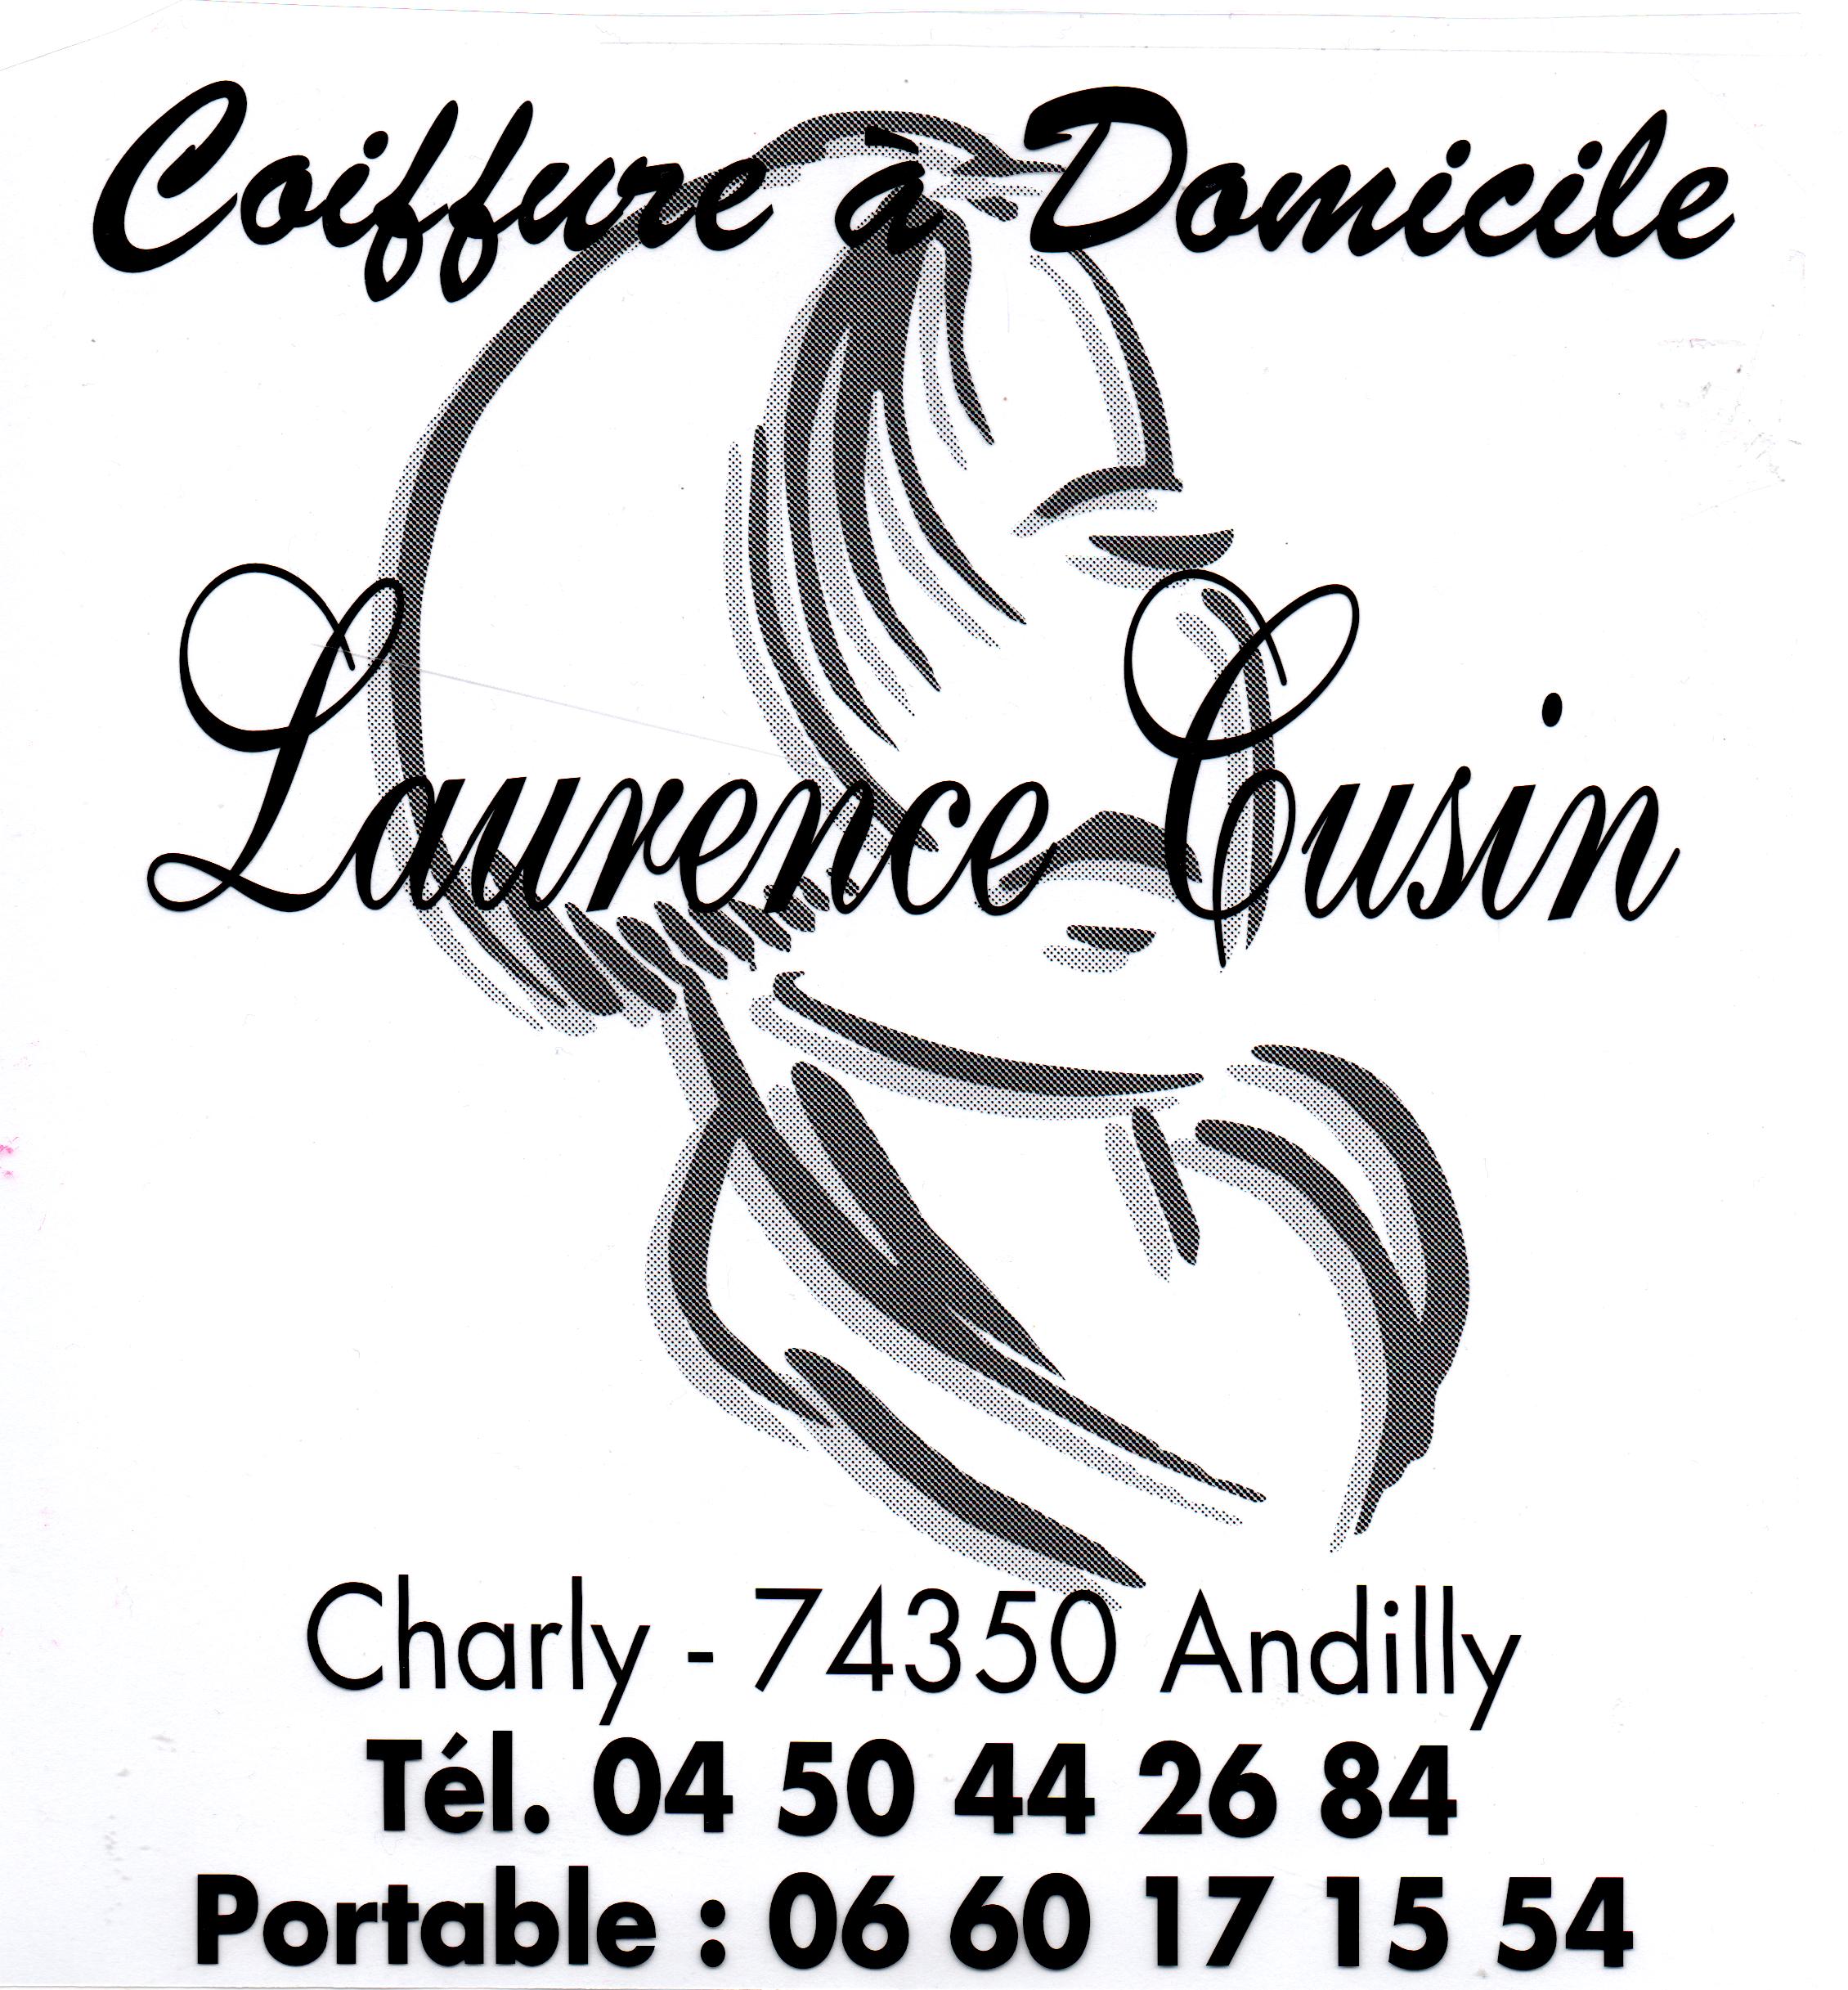 Coiffure à domicile charly 74350 Andilly Laurence Cusin